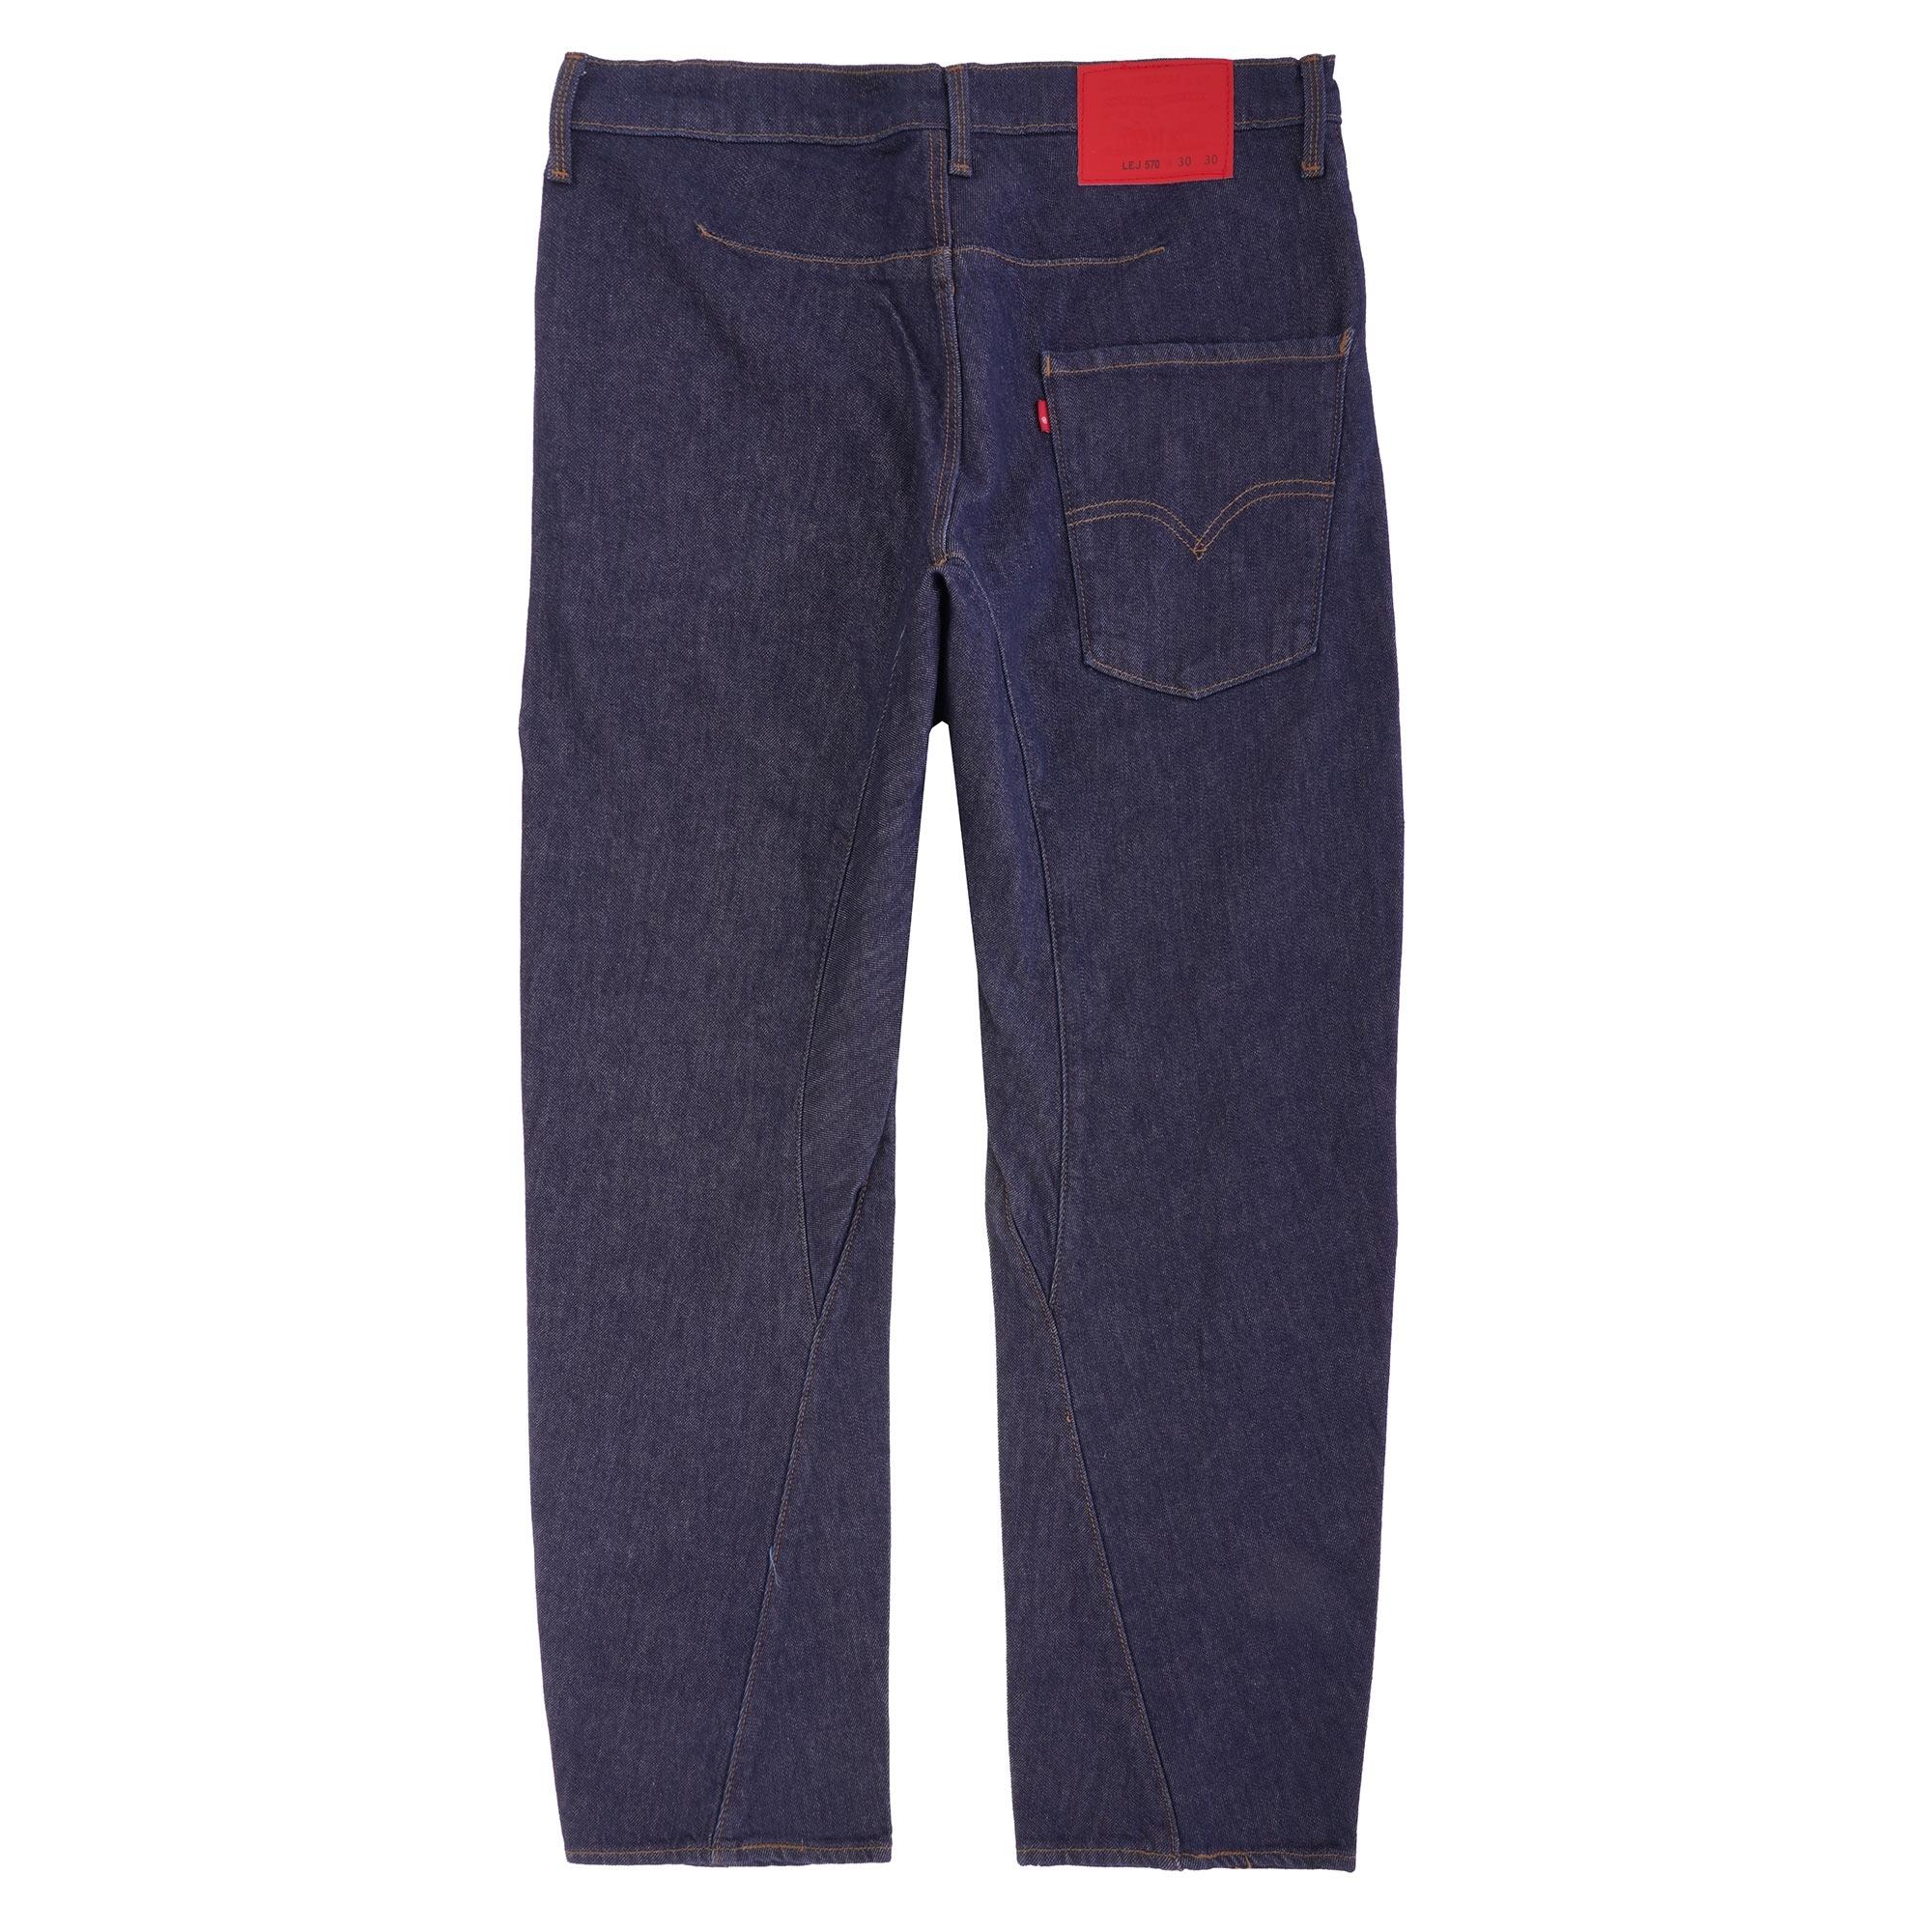 Lyst - Levi's 570 Baggy Tapered Fit Jeans - Rinse in Blue for Men